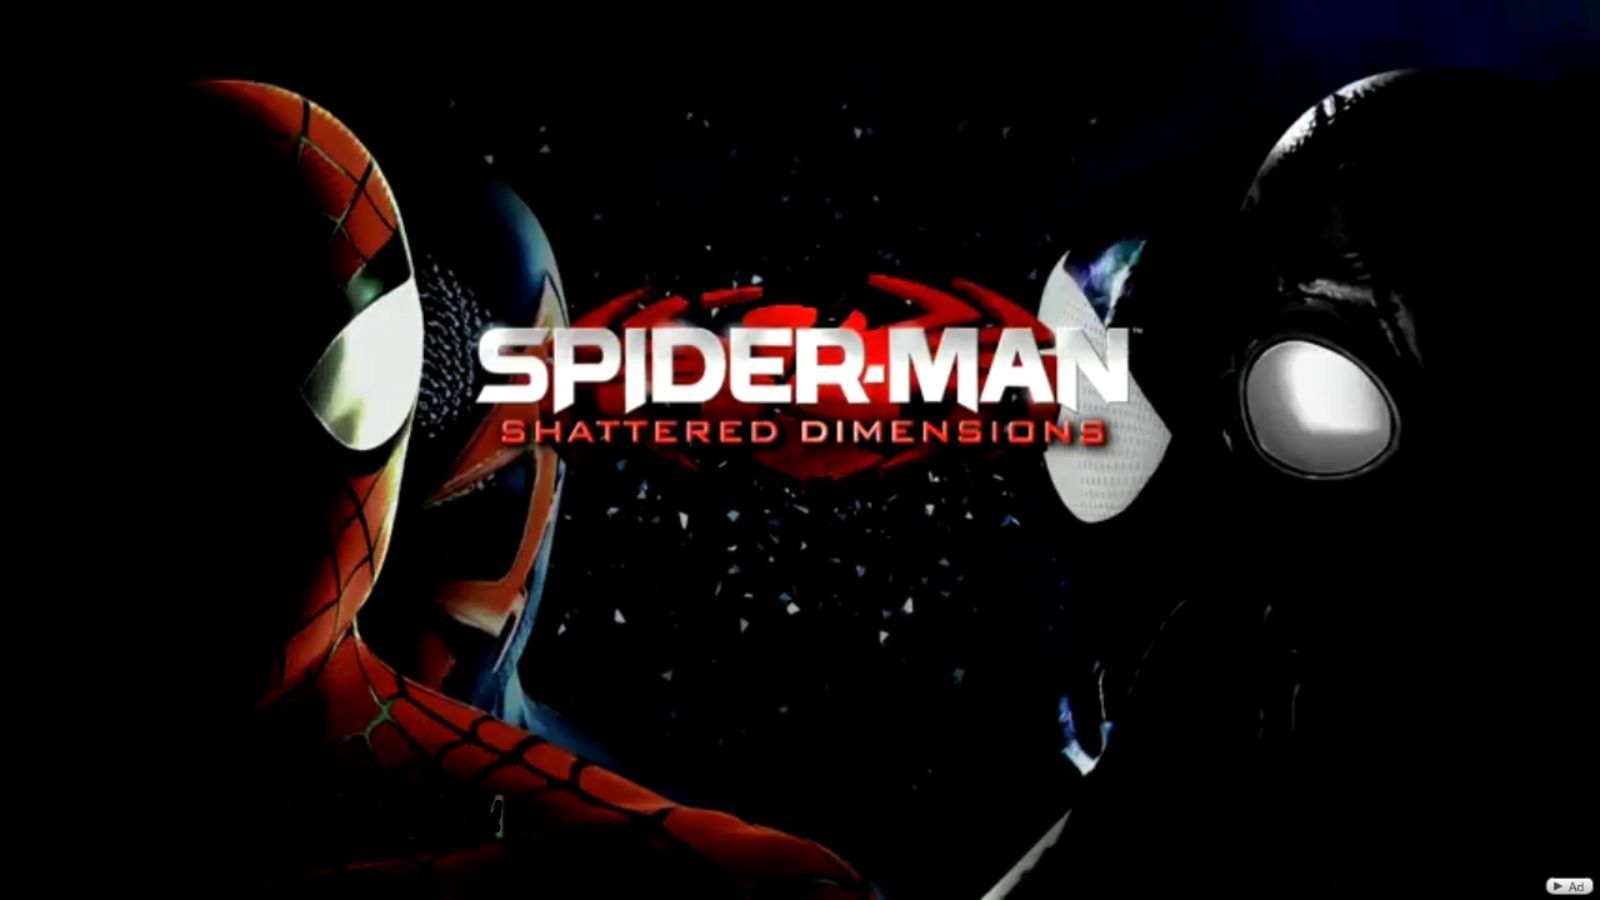 Spider Man: Shattered Dimensions HD Wallpaper 15 X 900. Spider Man Shattered Dimensions, Spider, Spiderman